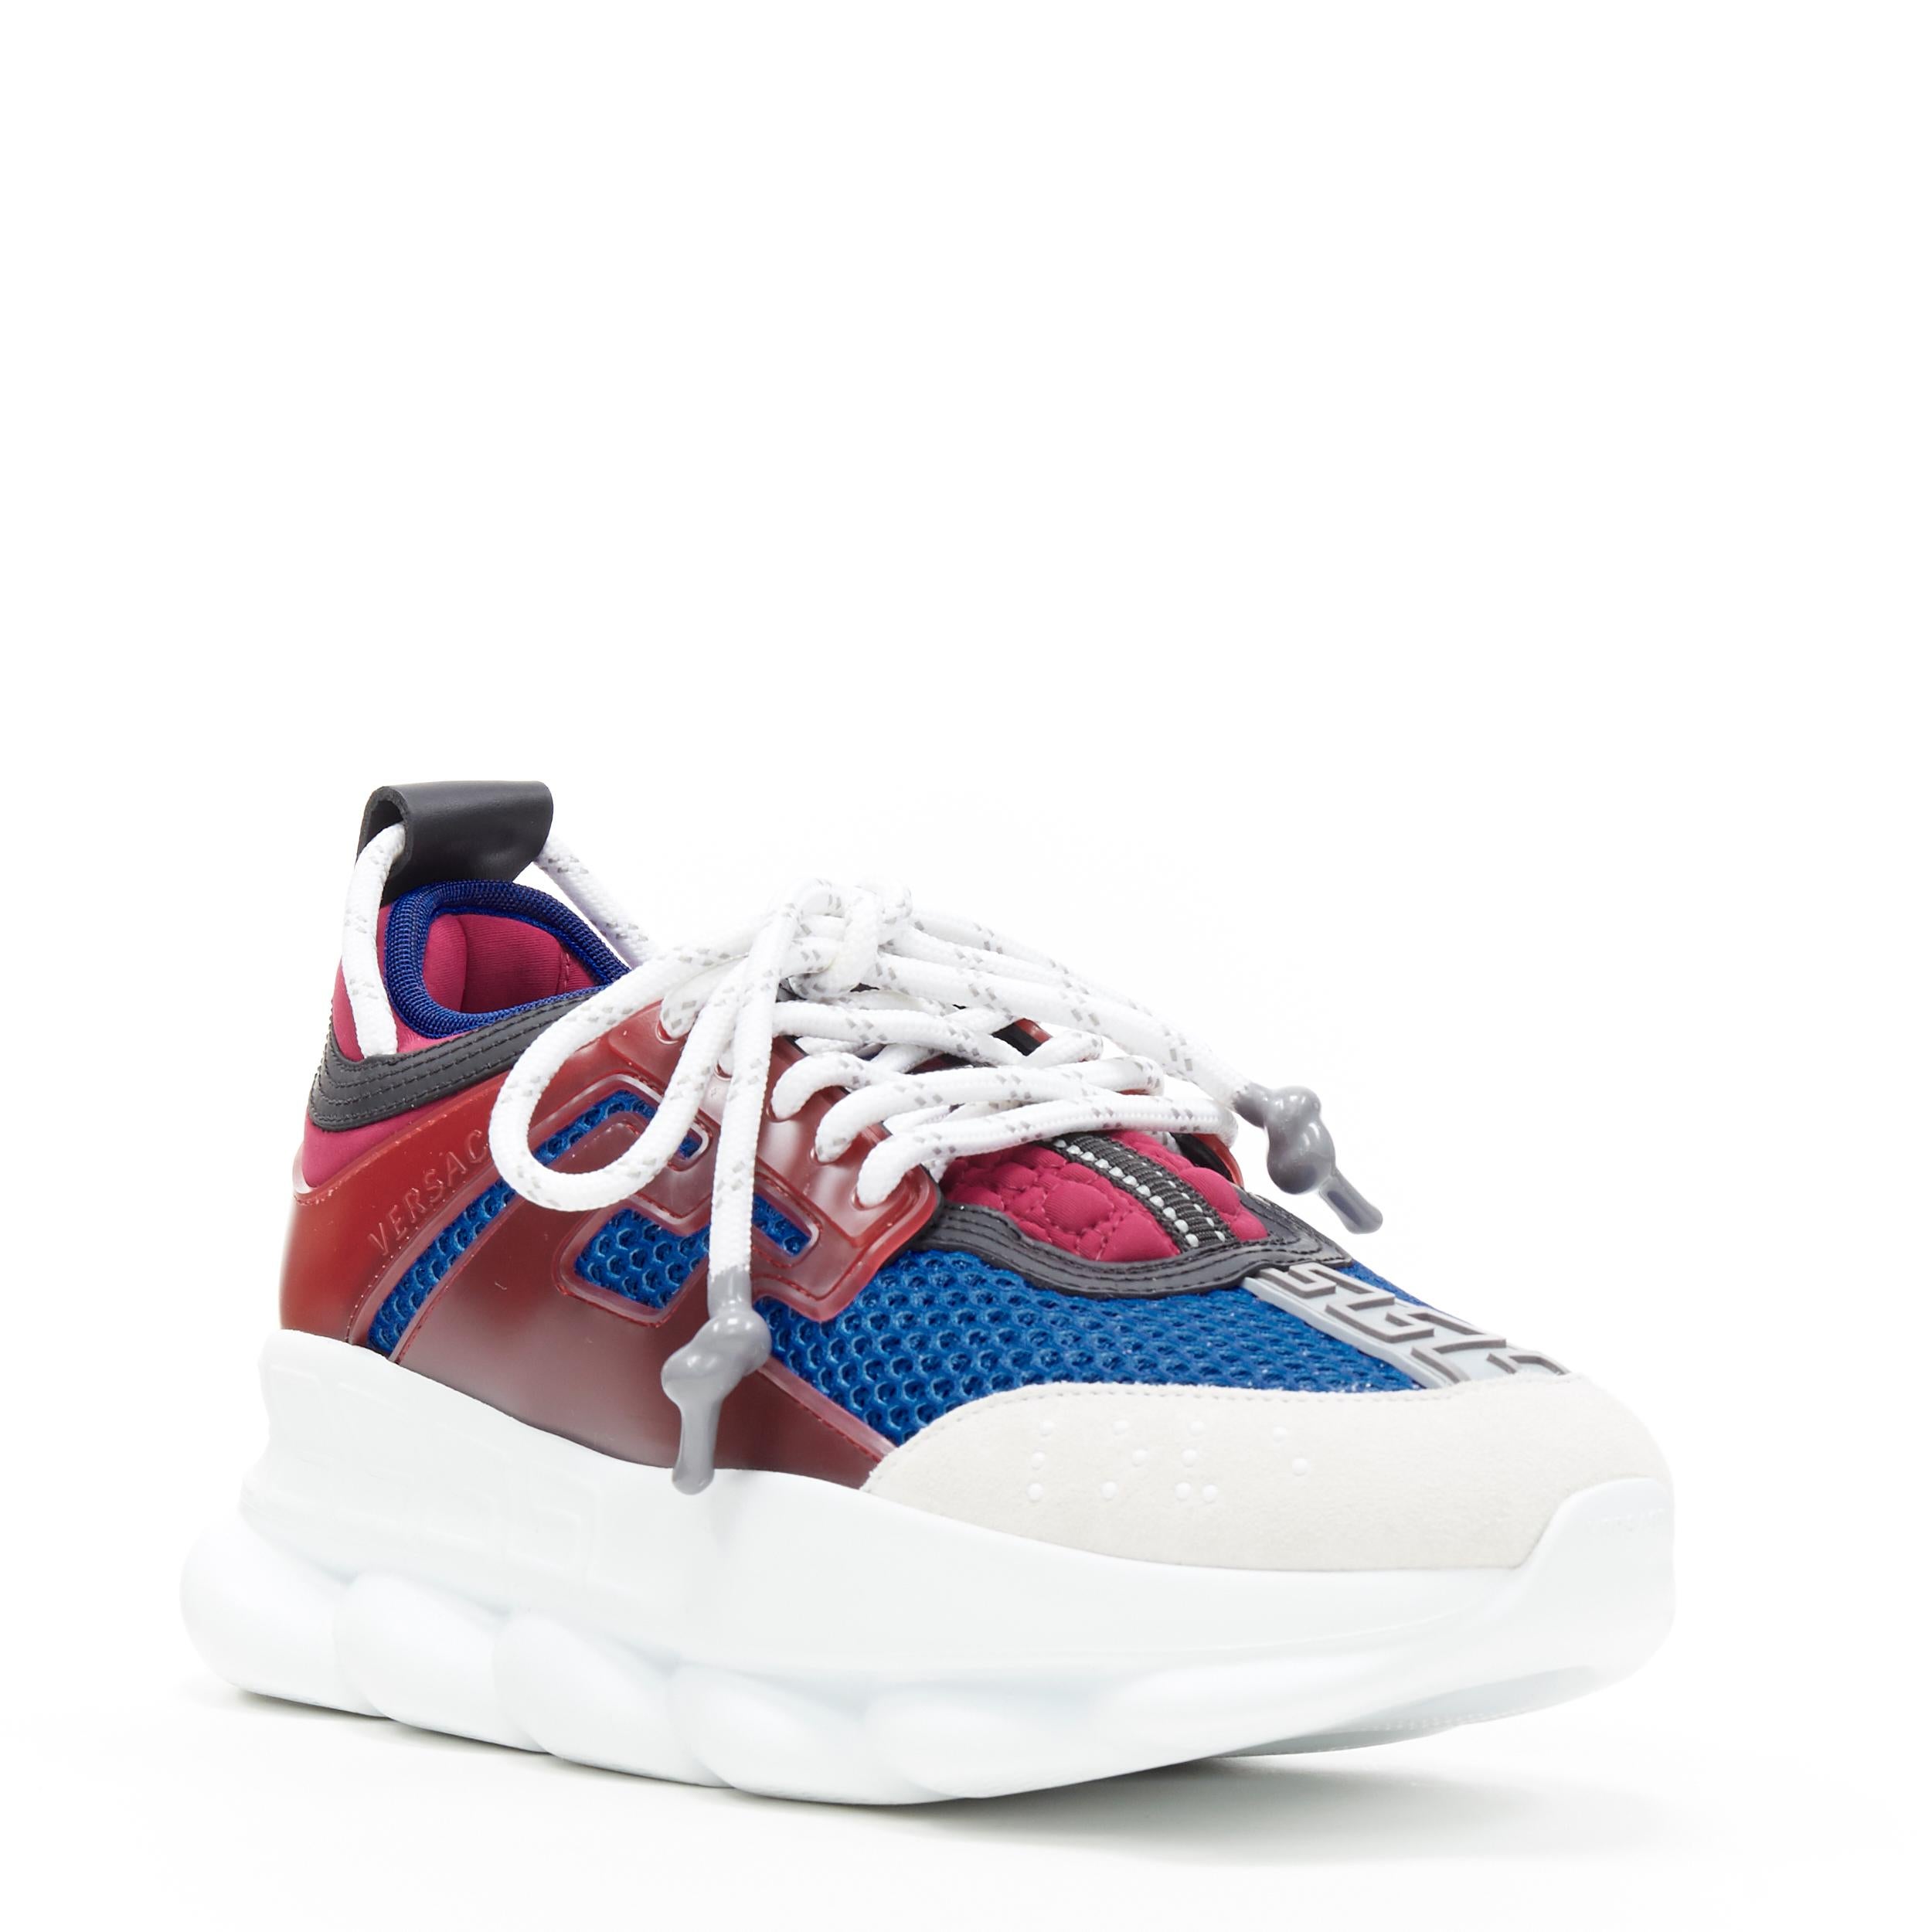 new VERSACE Chain Reaction burgundy grey suede blue mesh chunky sneaker EU39
Brand: Versace
Designer: Donatella Versace
Collection: 2019
Model Name / Style: Chain Reaction
Material: Fabric
Color: Multicolour
Pattern: Solid
Closure: Lace up
Extra